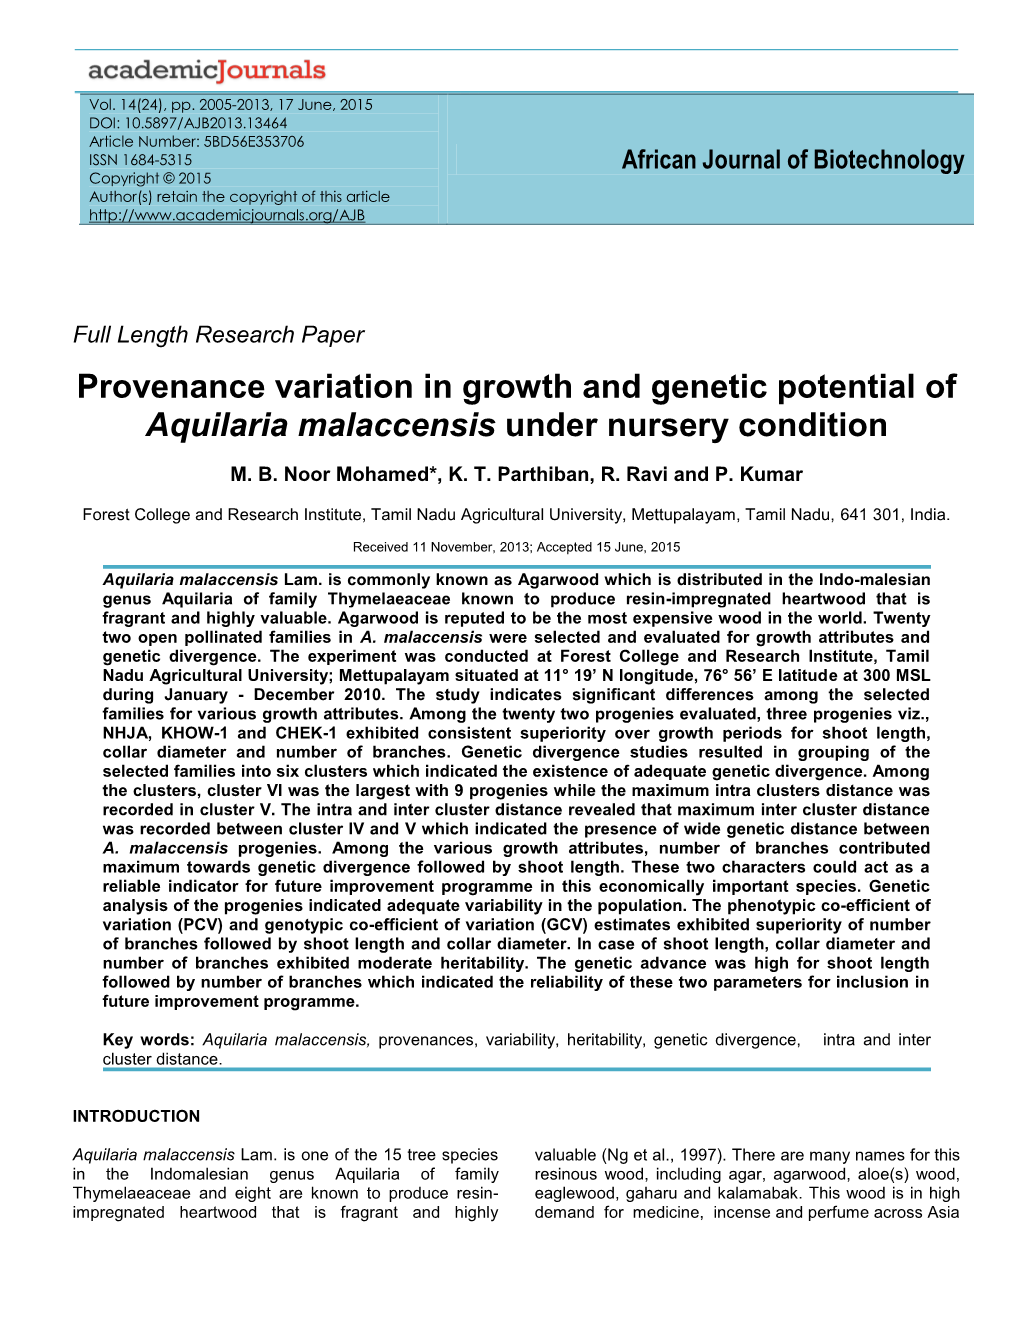 Provenance Variation in Growth and Genetic Potential of Aquilaria Malaccensis Under Nursery Condition